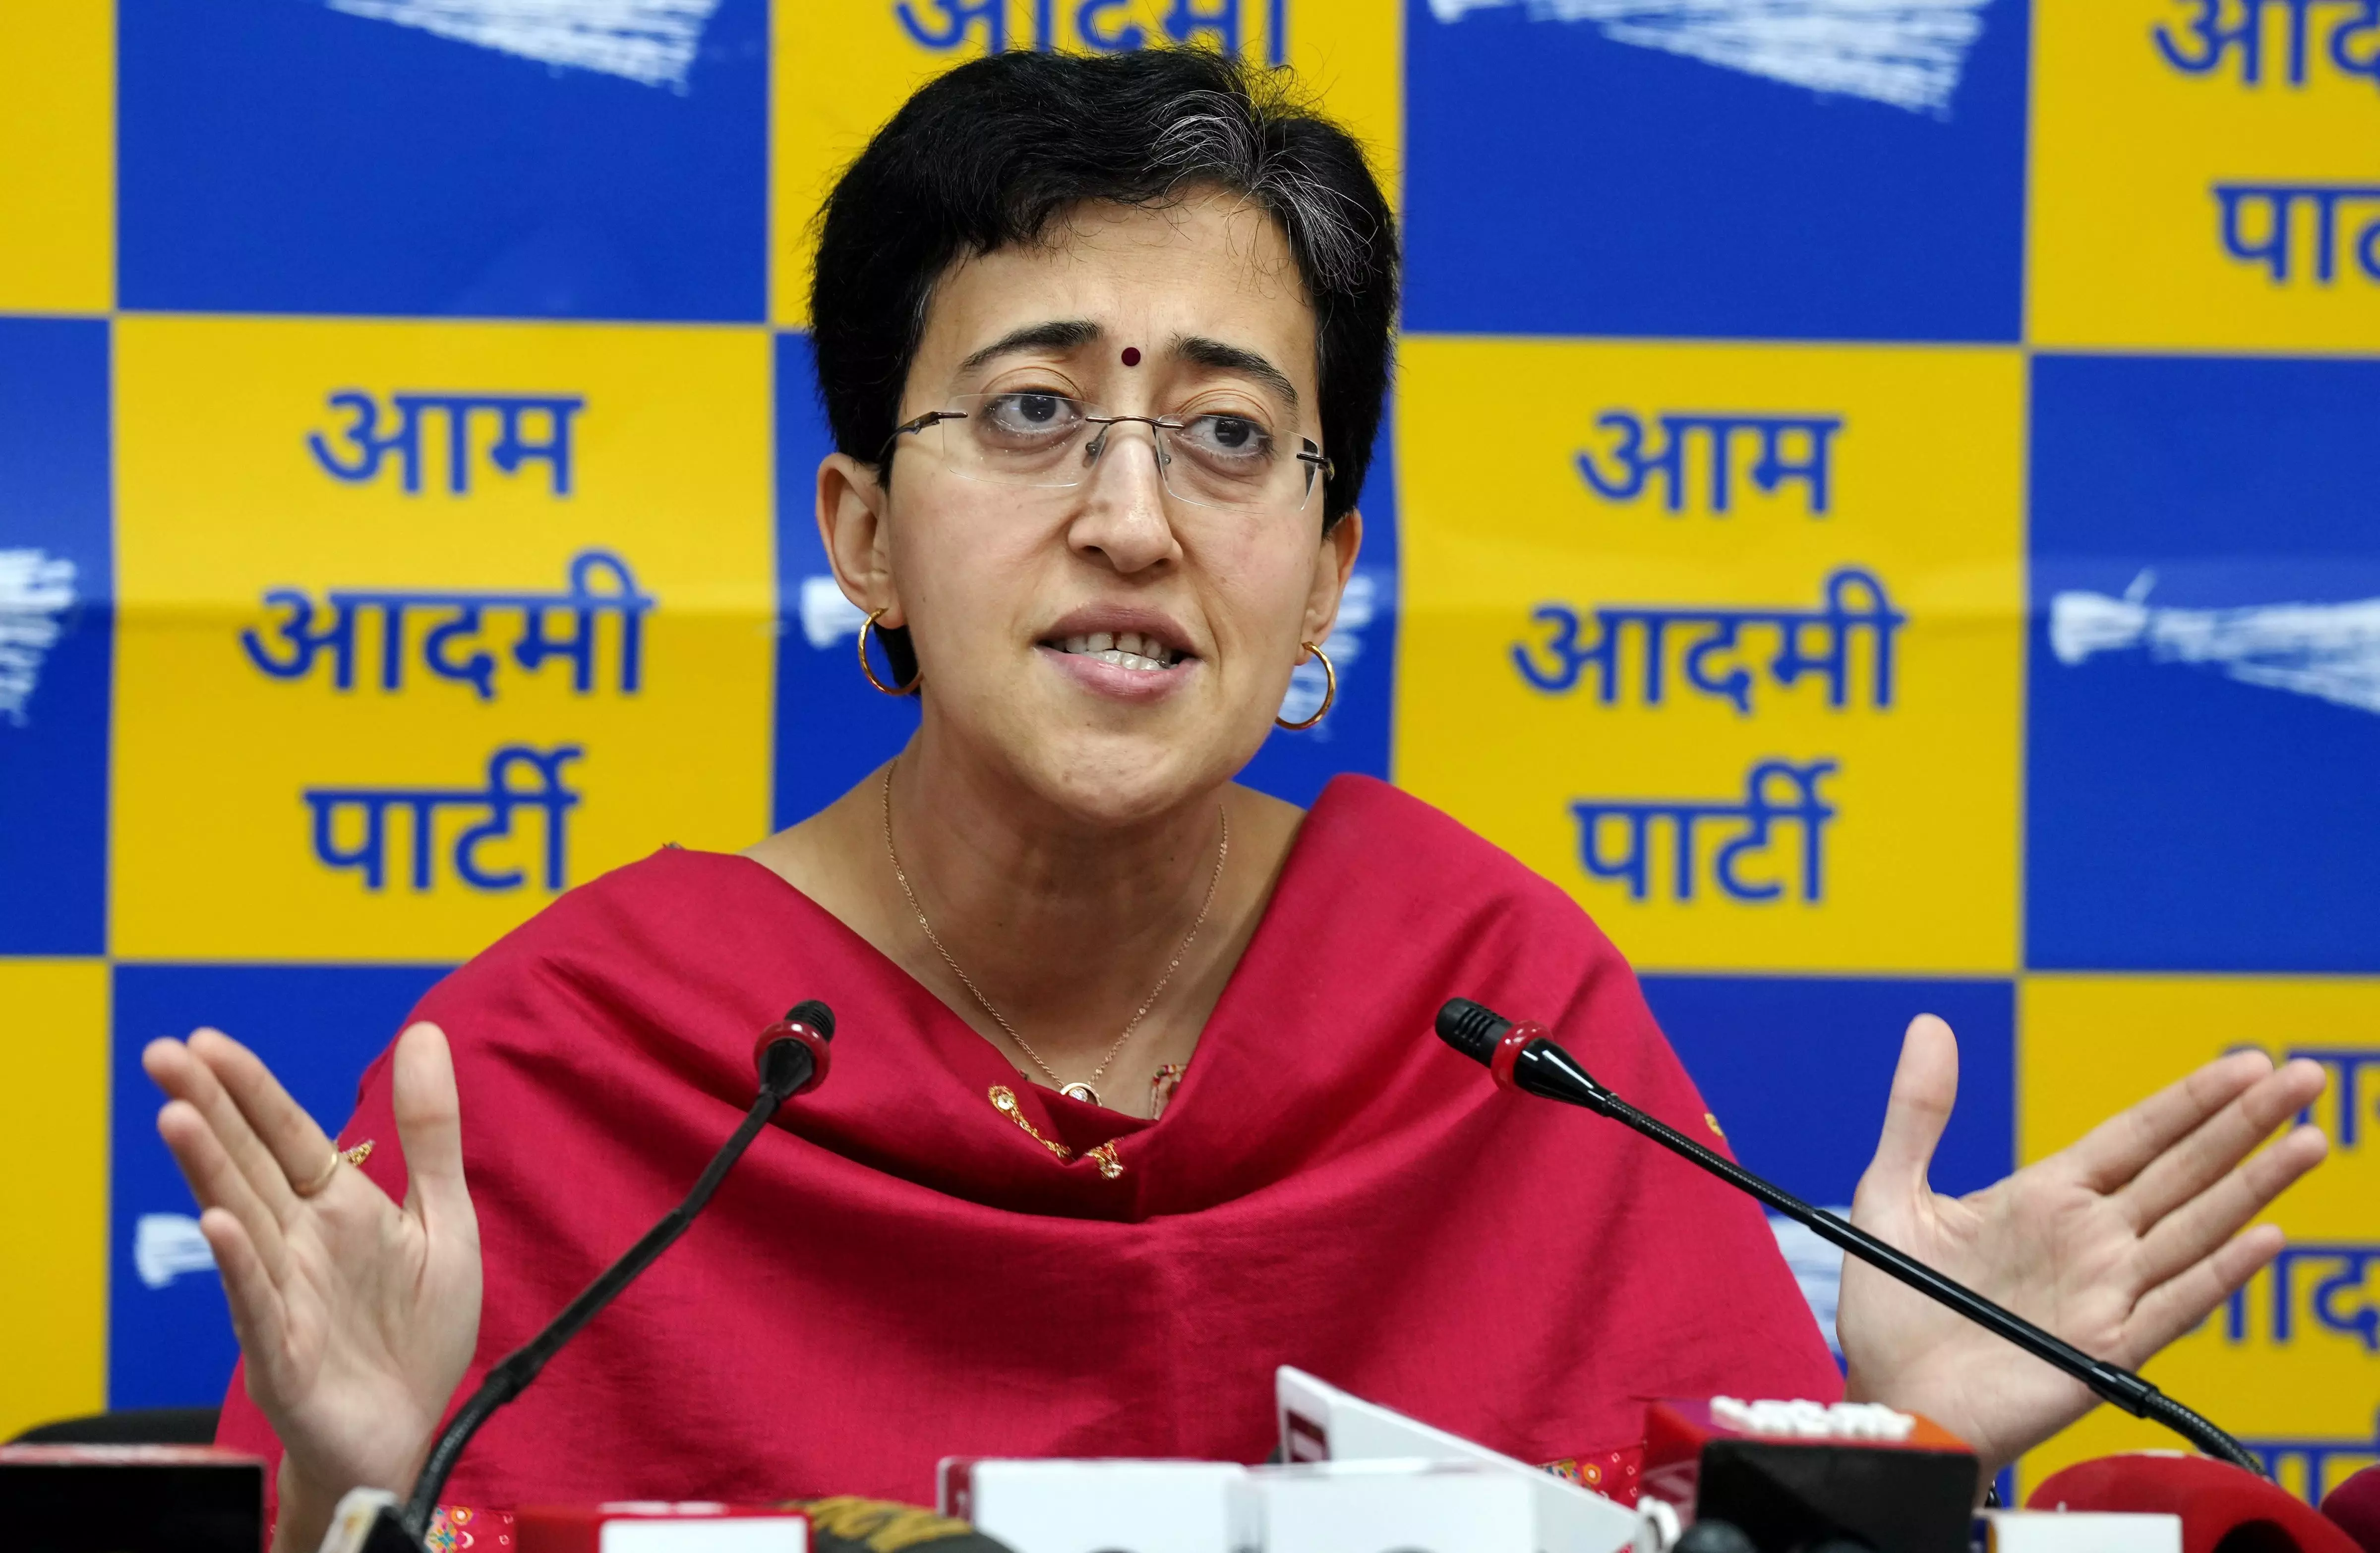 AAP office in Delhi sealed, matter to be raised with Election Commission: Atishi